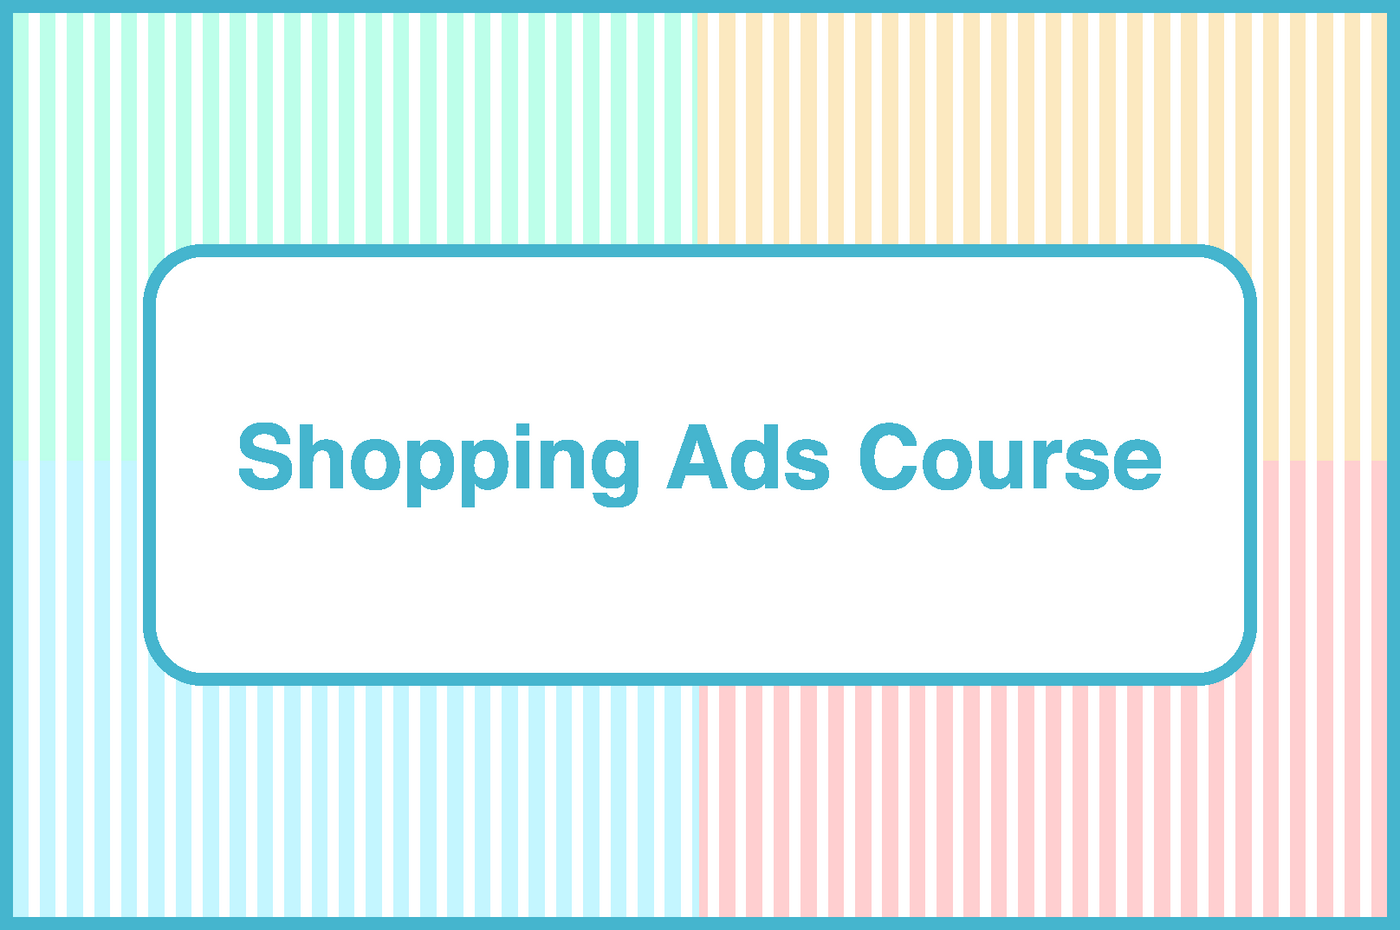 Shopping Ads Course